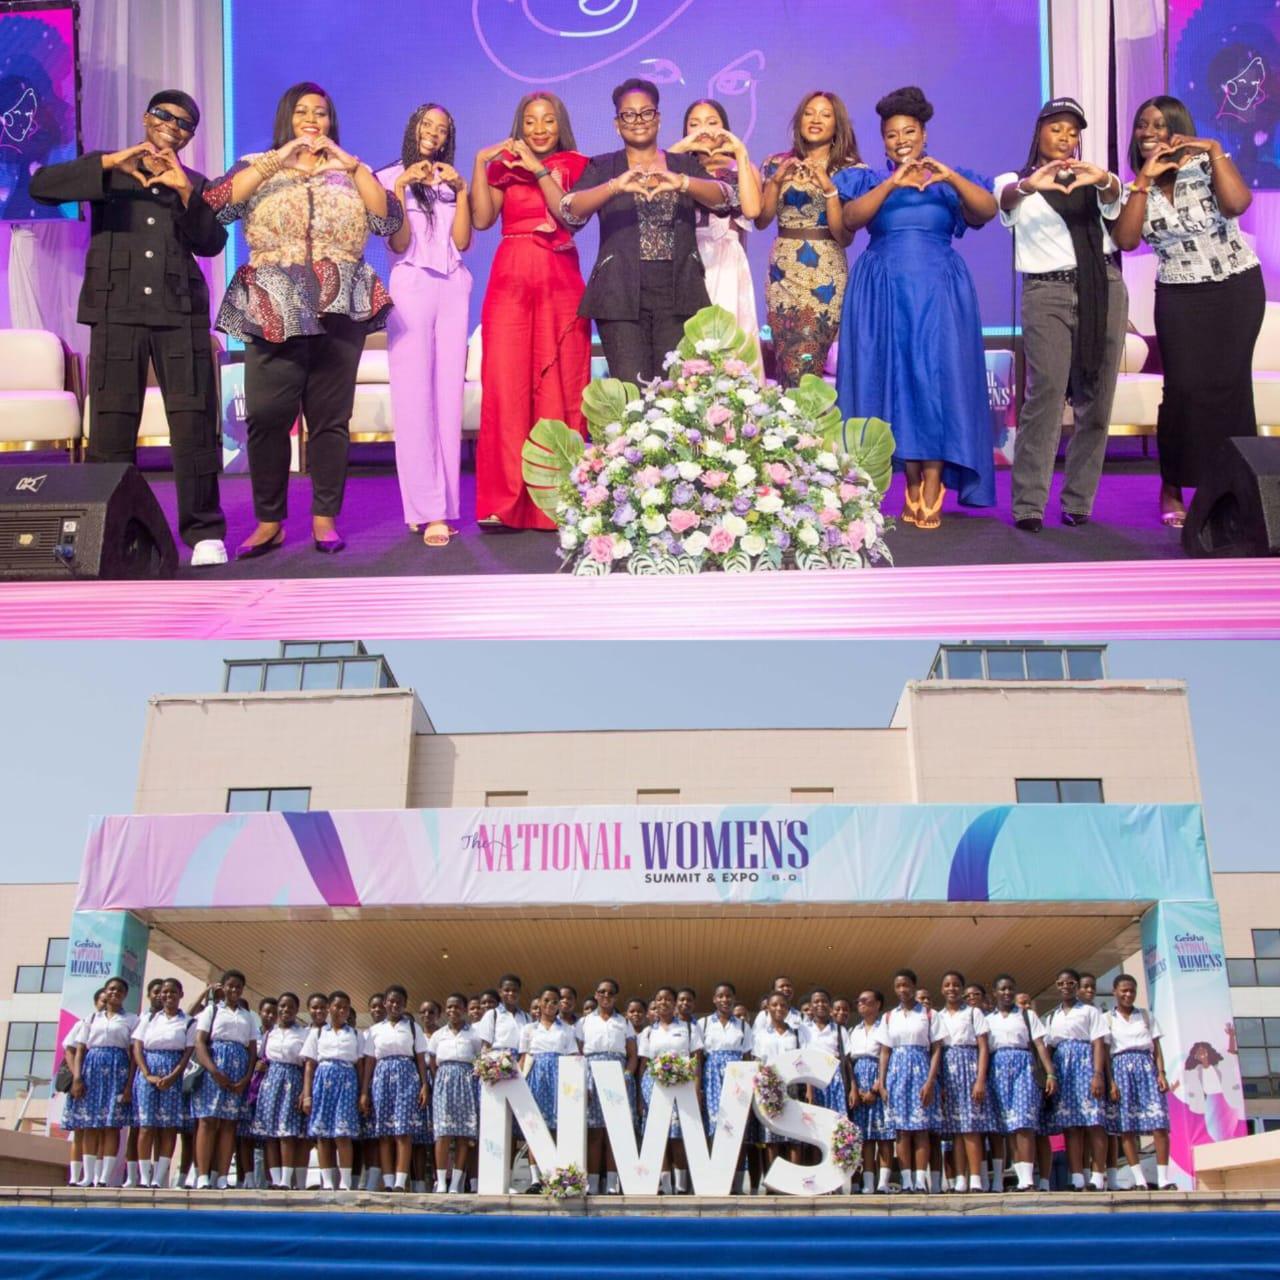 Patrons inspired at the National Women’s Summit & Expo 6.0